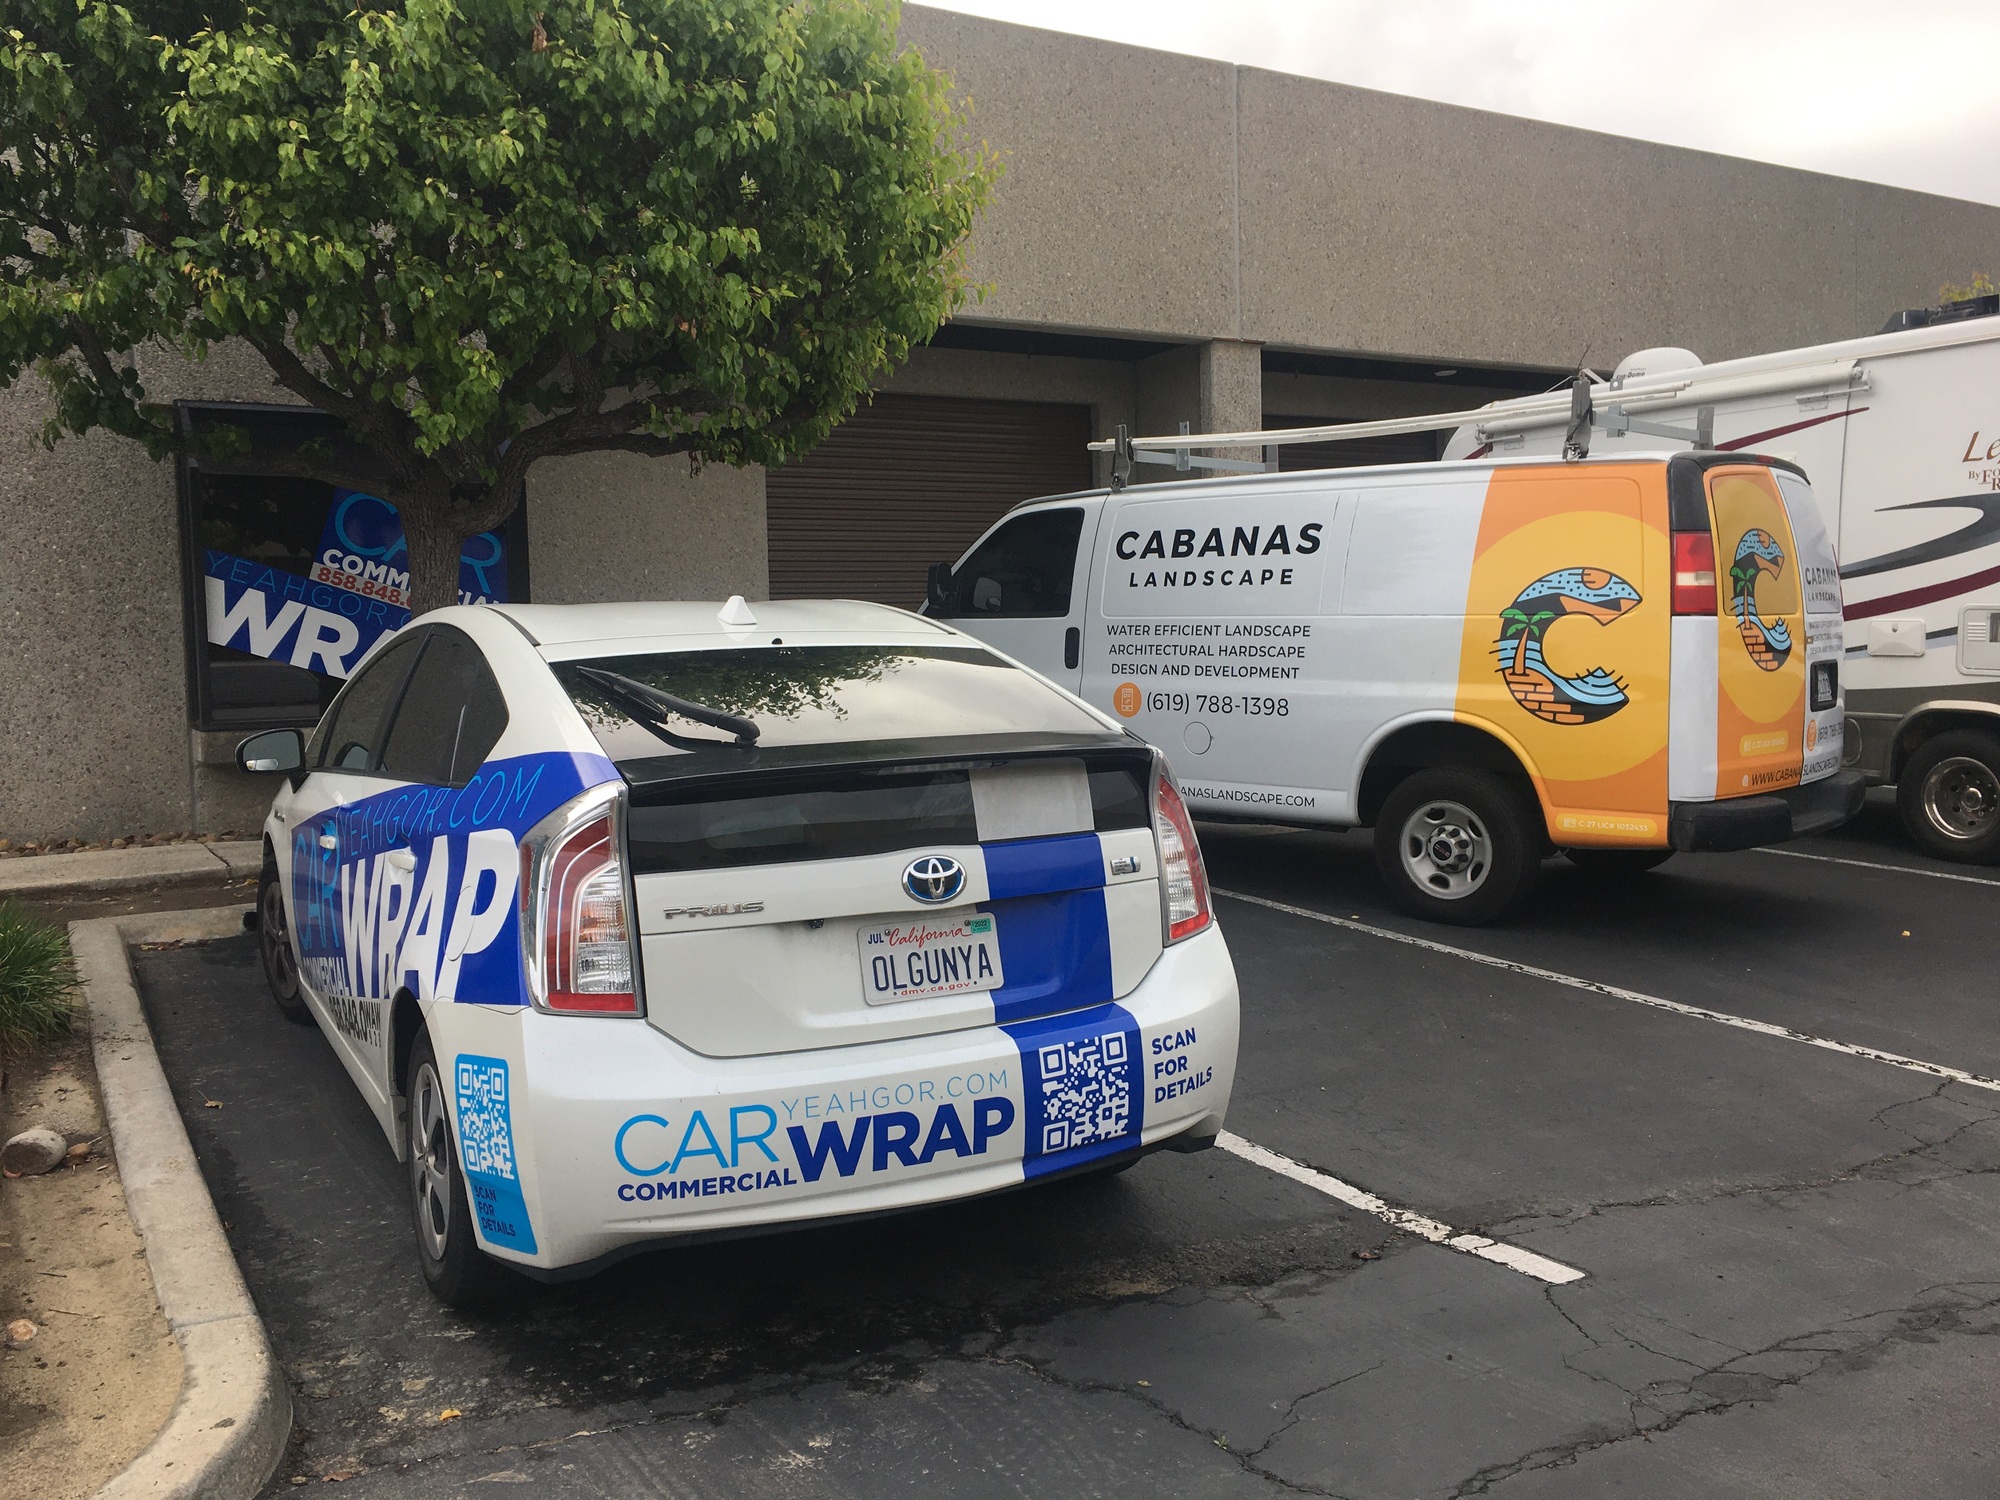 Encinitas, CA – Cars Signage and Commercial Fleet Wrap for Small Business.